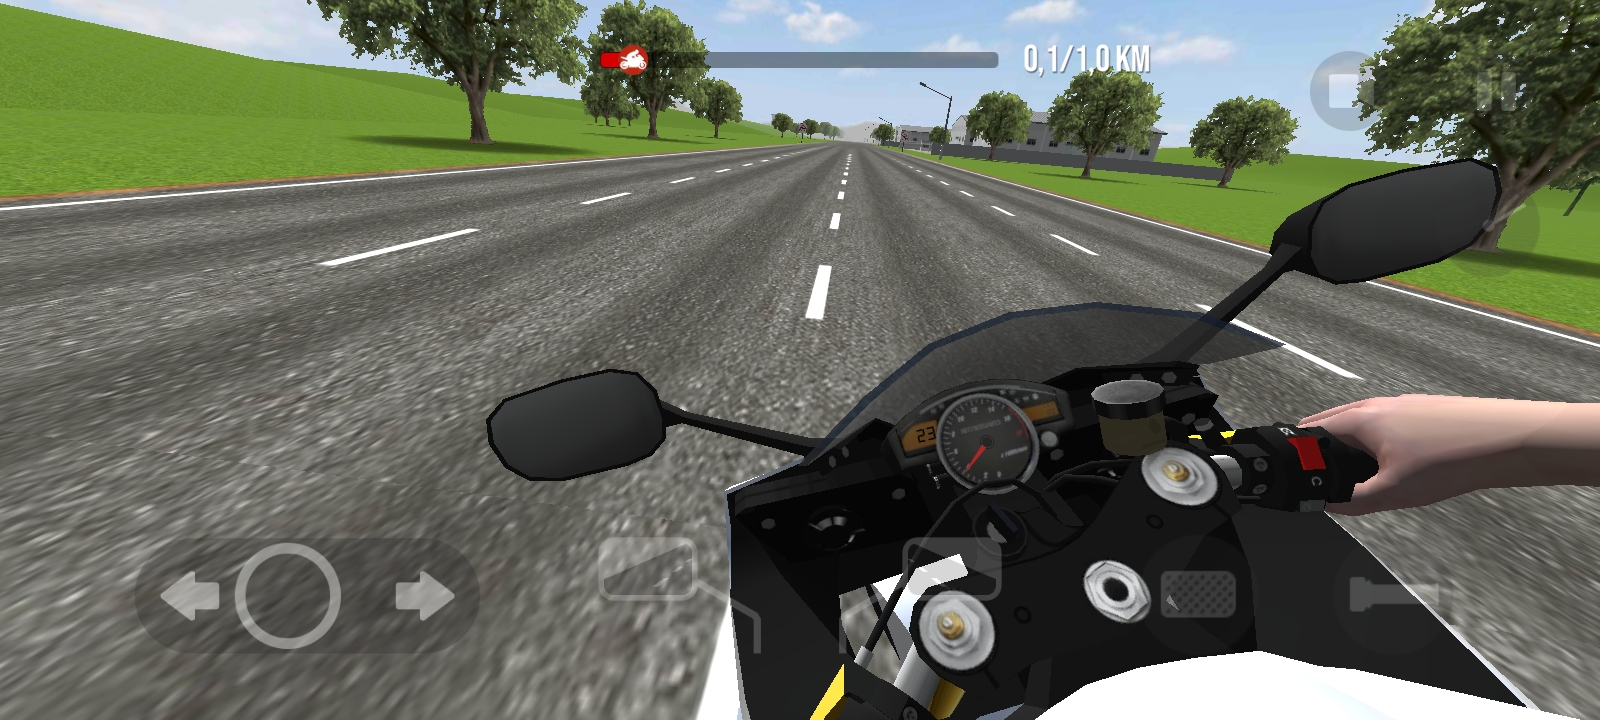 Traffic Motos 2 Mod apk [Unlimited money] download - Traffic Motos 2 MOD  apk 3.5 free for Android.